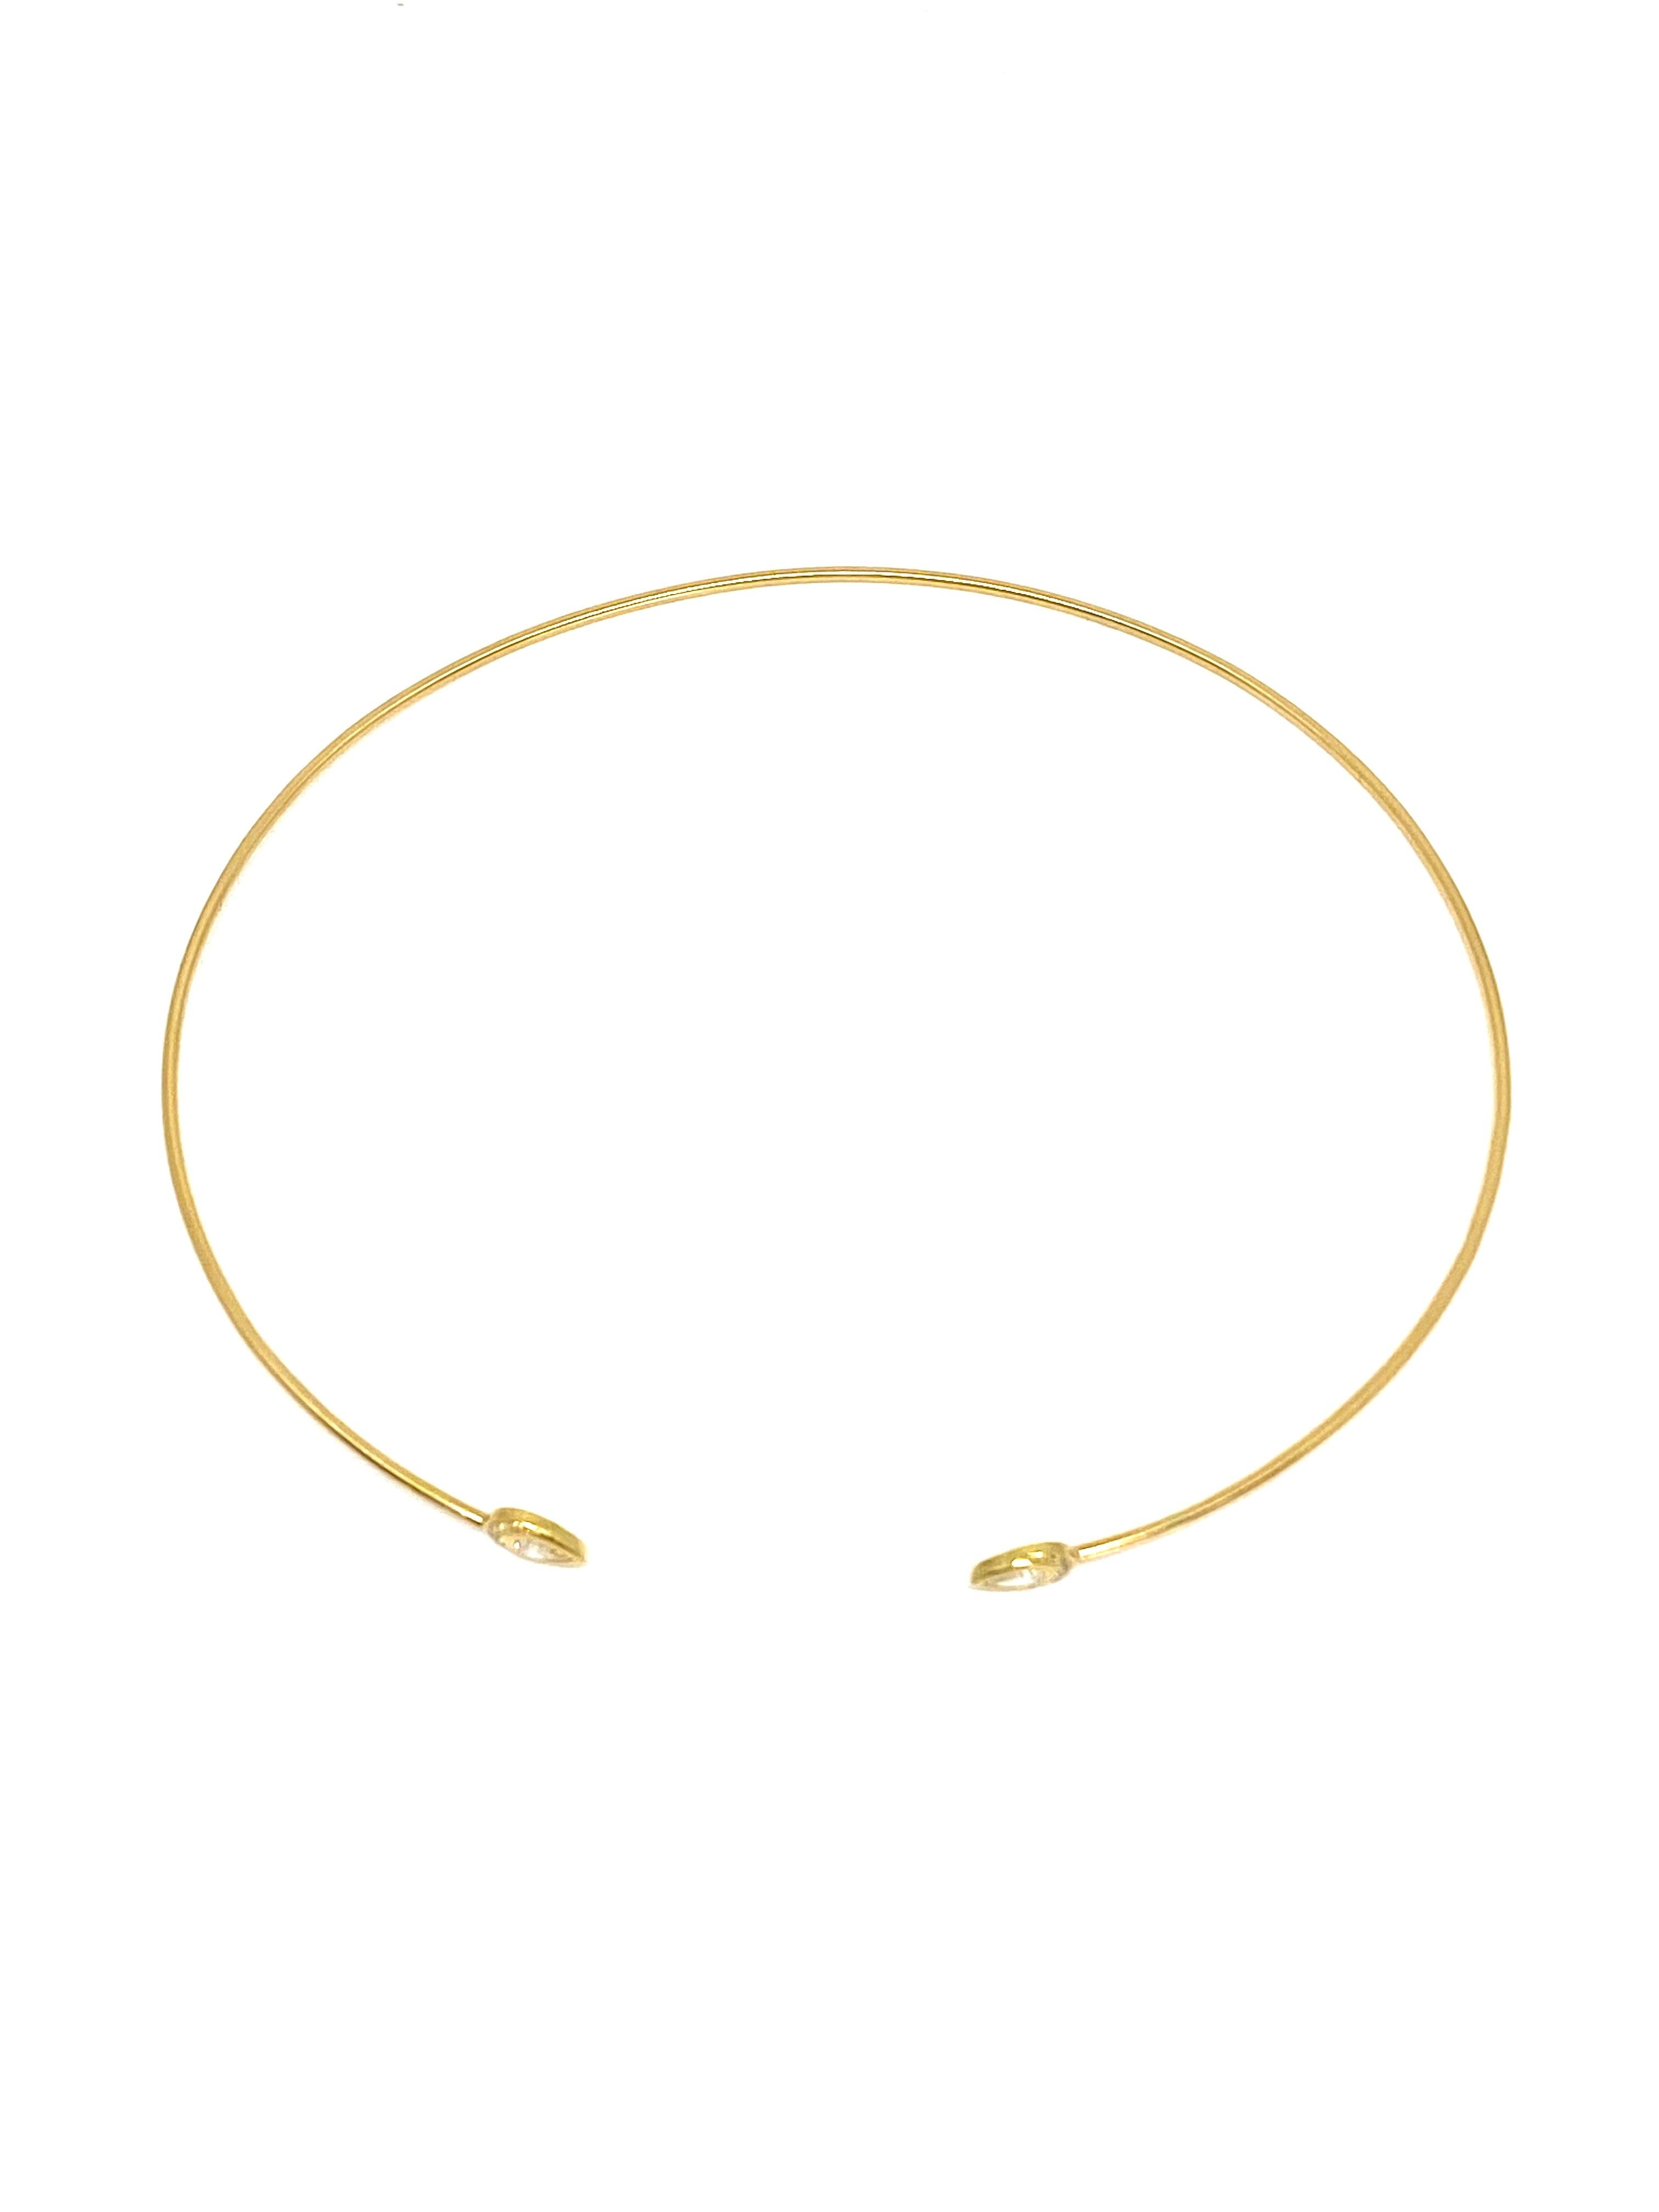 Pear Cut Modern 18K Yellow Gold and Diamond Wire Choker Necklace